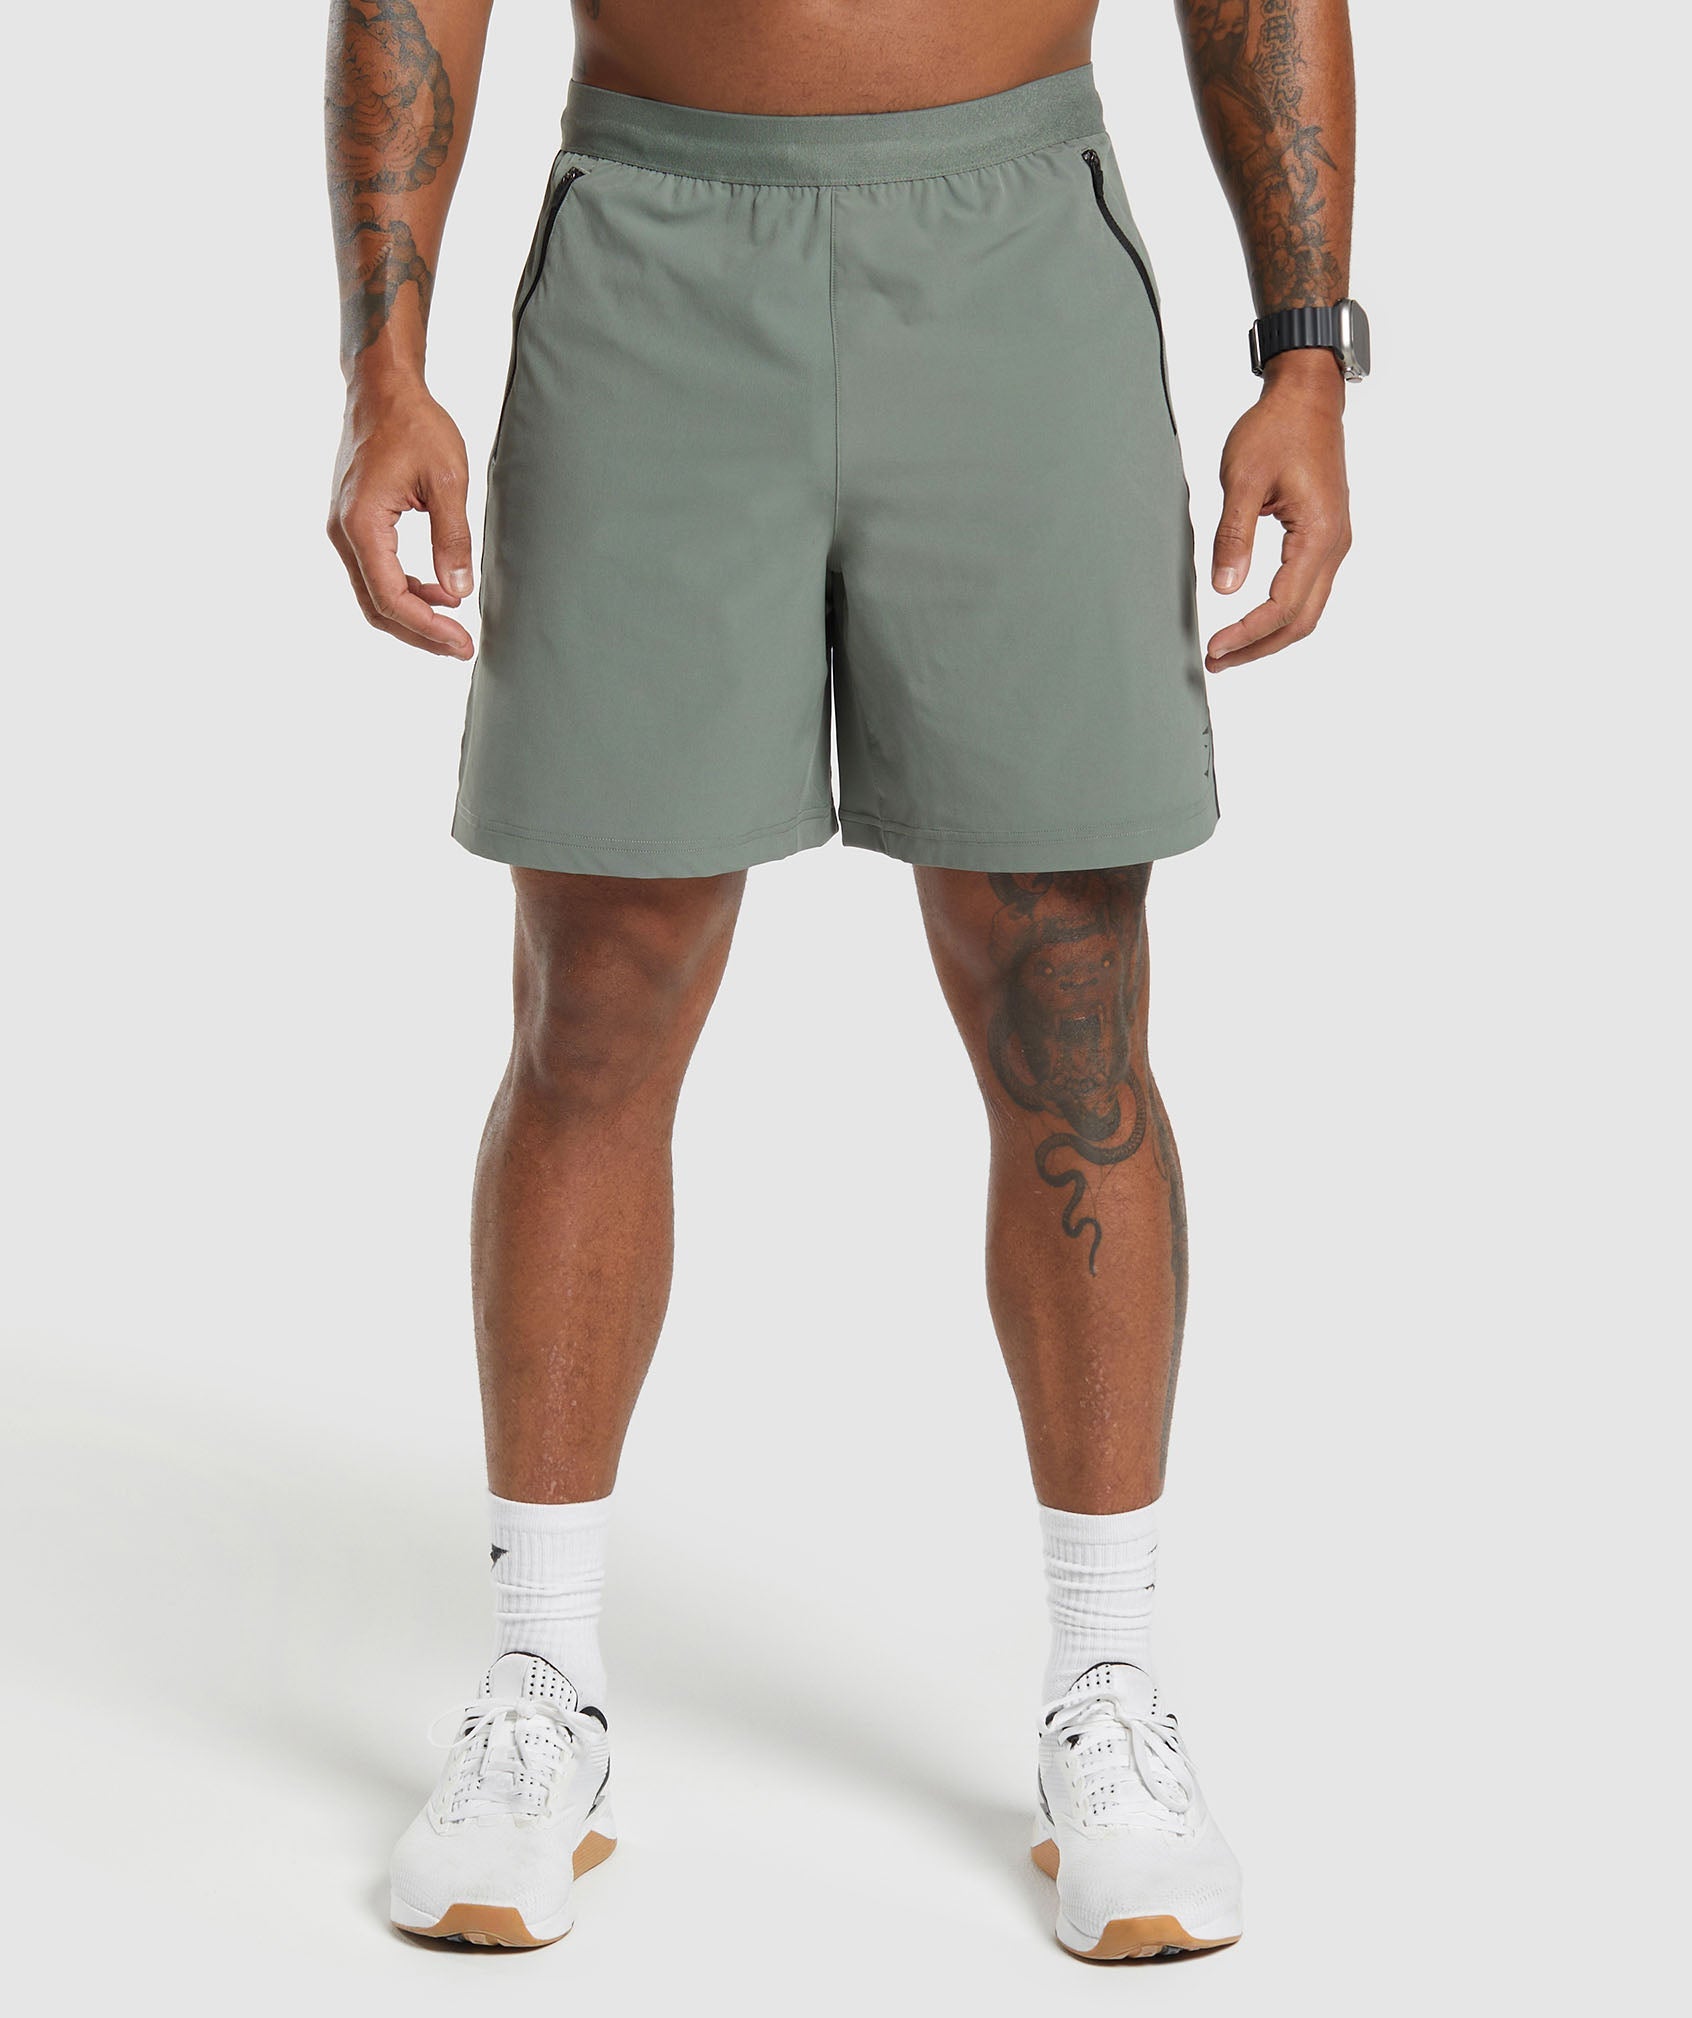 Apex 7" Hybrid Shorts in Unit Green - view 1